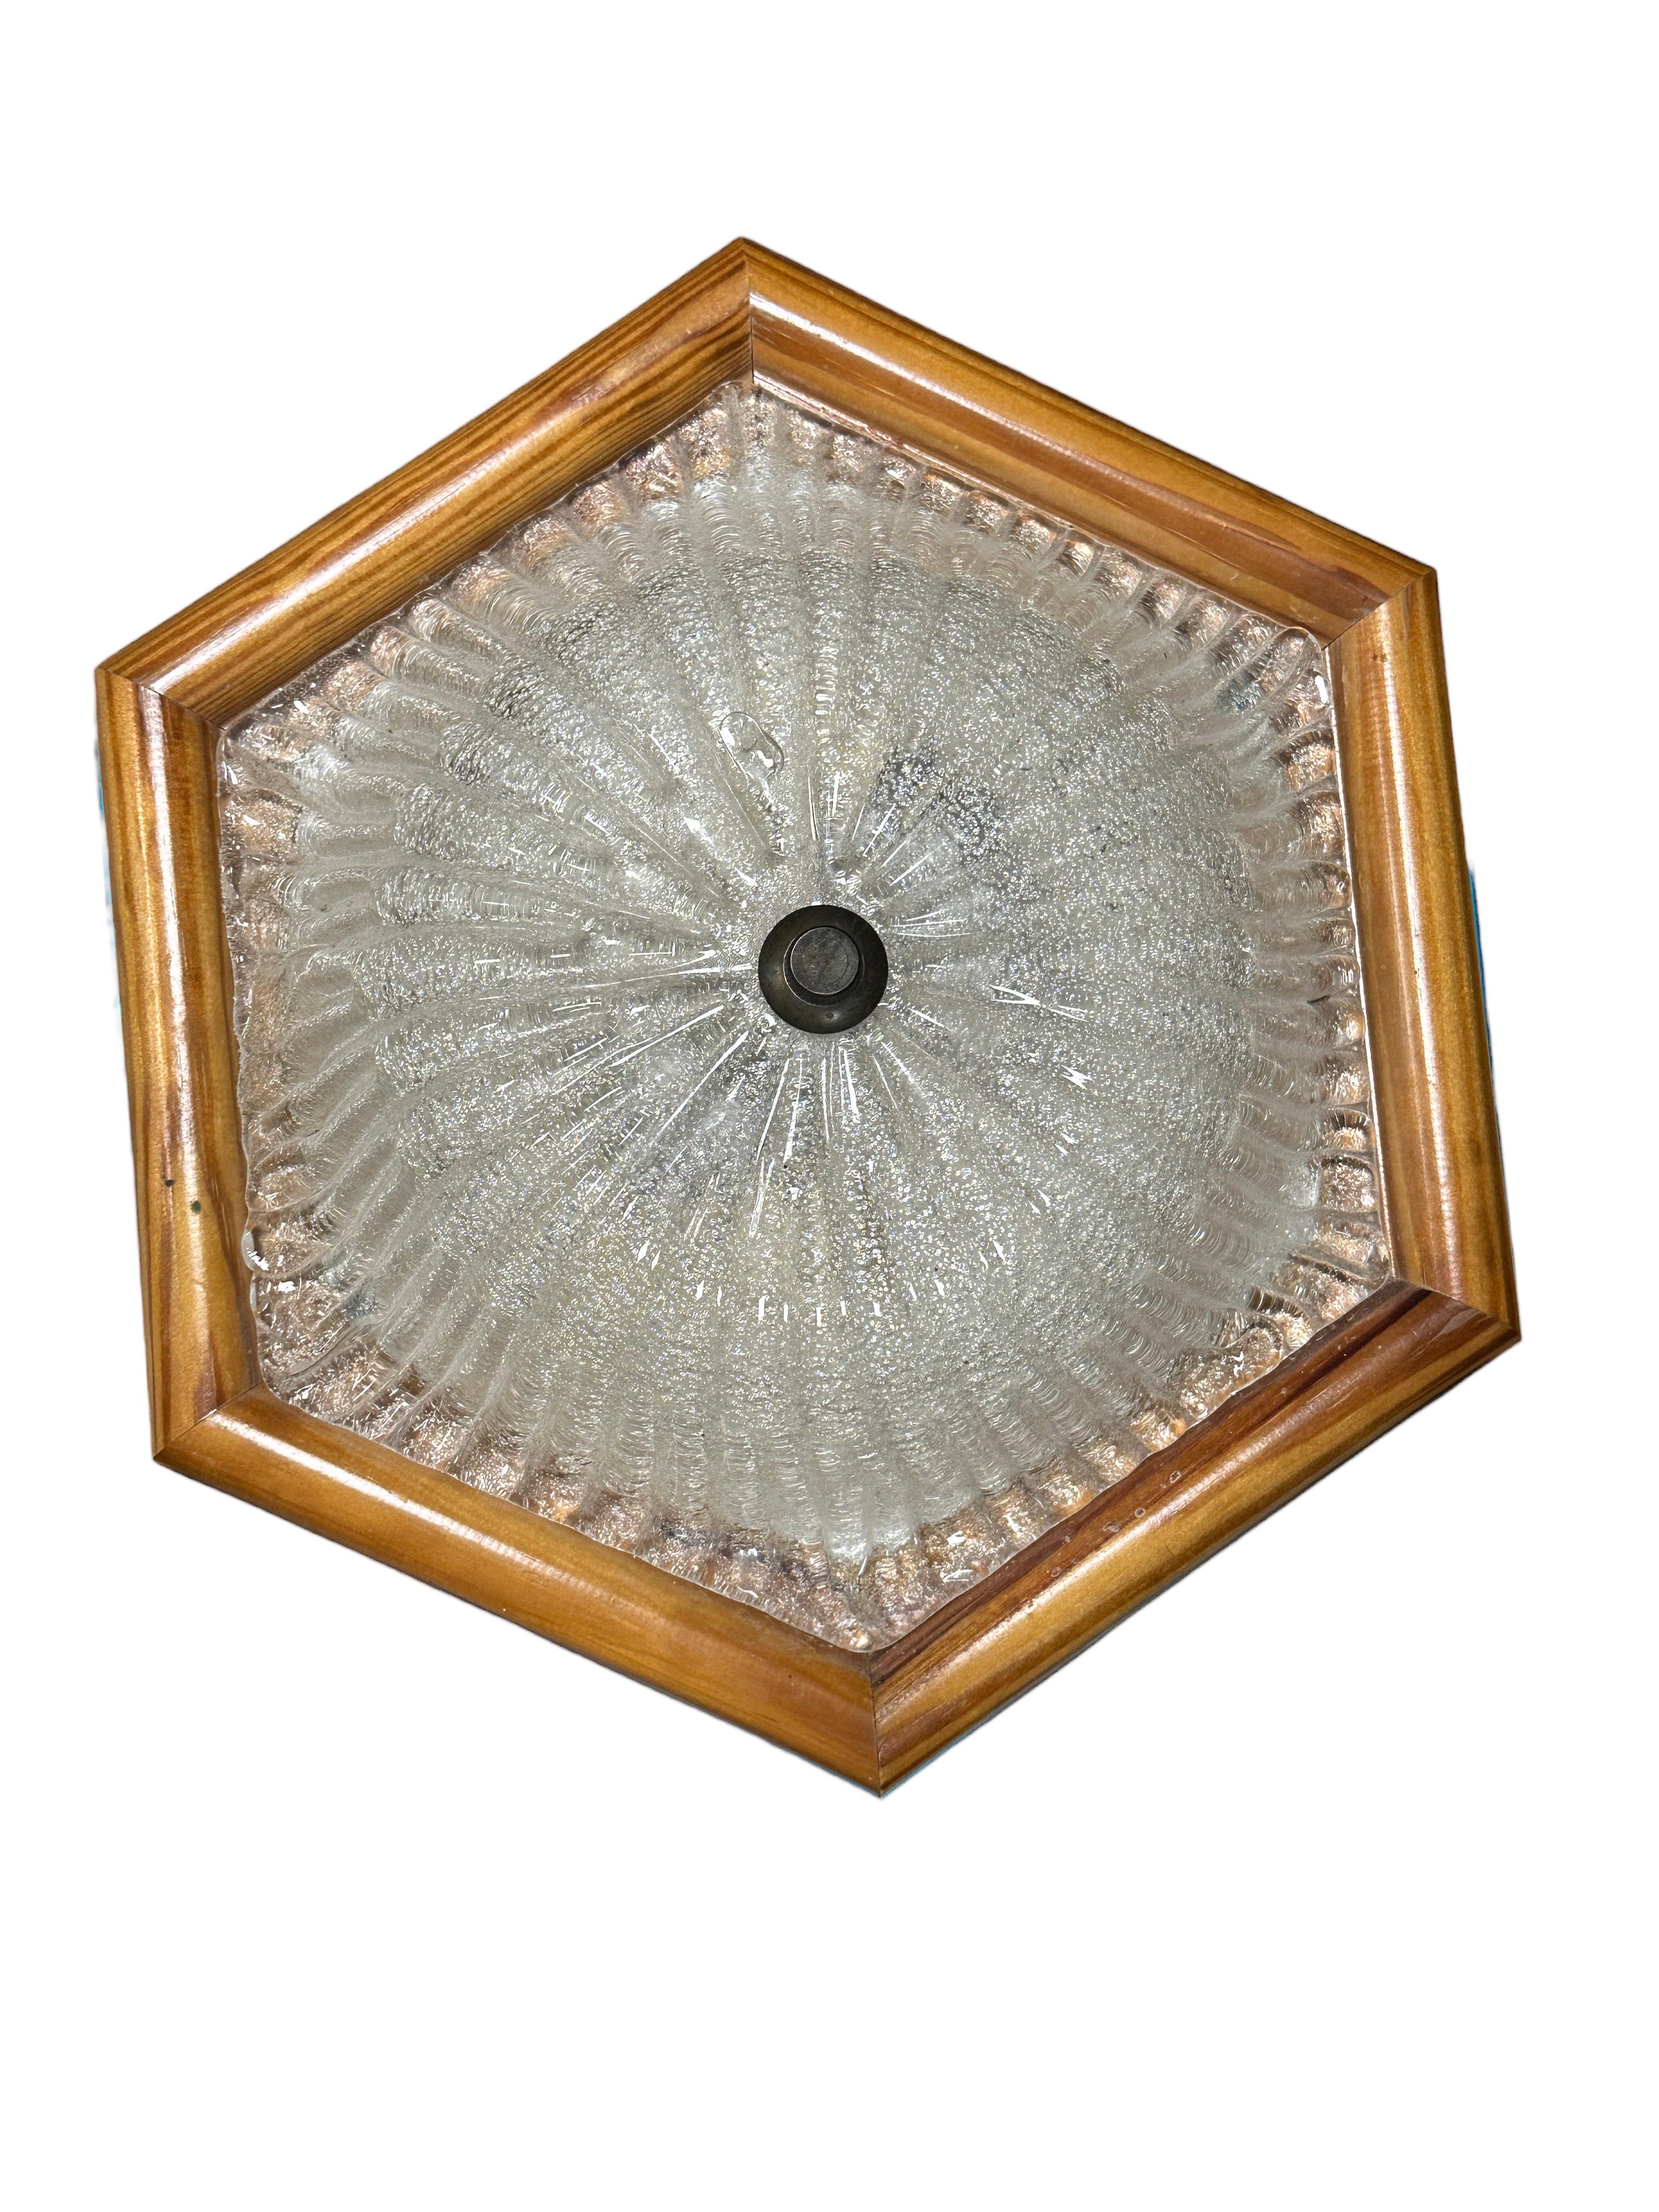 A beautiful ice glass flush mount. Made in Austria by Eglo Leuchten in the 1980s. Gorgeous textured glass flush mount with metal fixture and a wooden frame. The Fixture requires two European E14 / 110 Volt Candelabra bulbs, each bulb up to 40 watts.